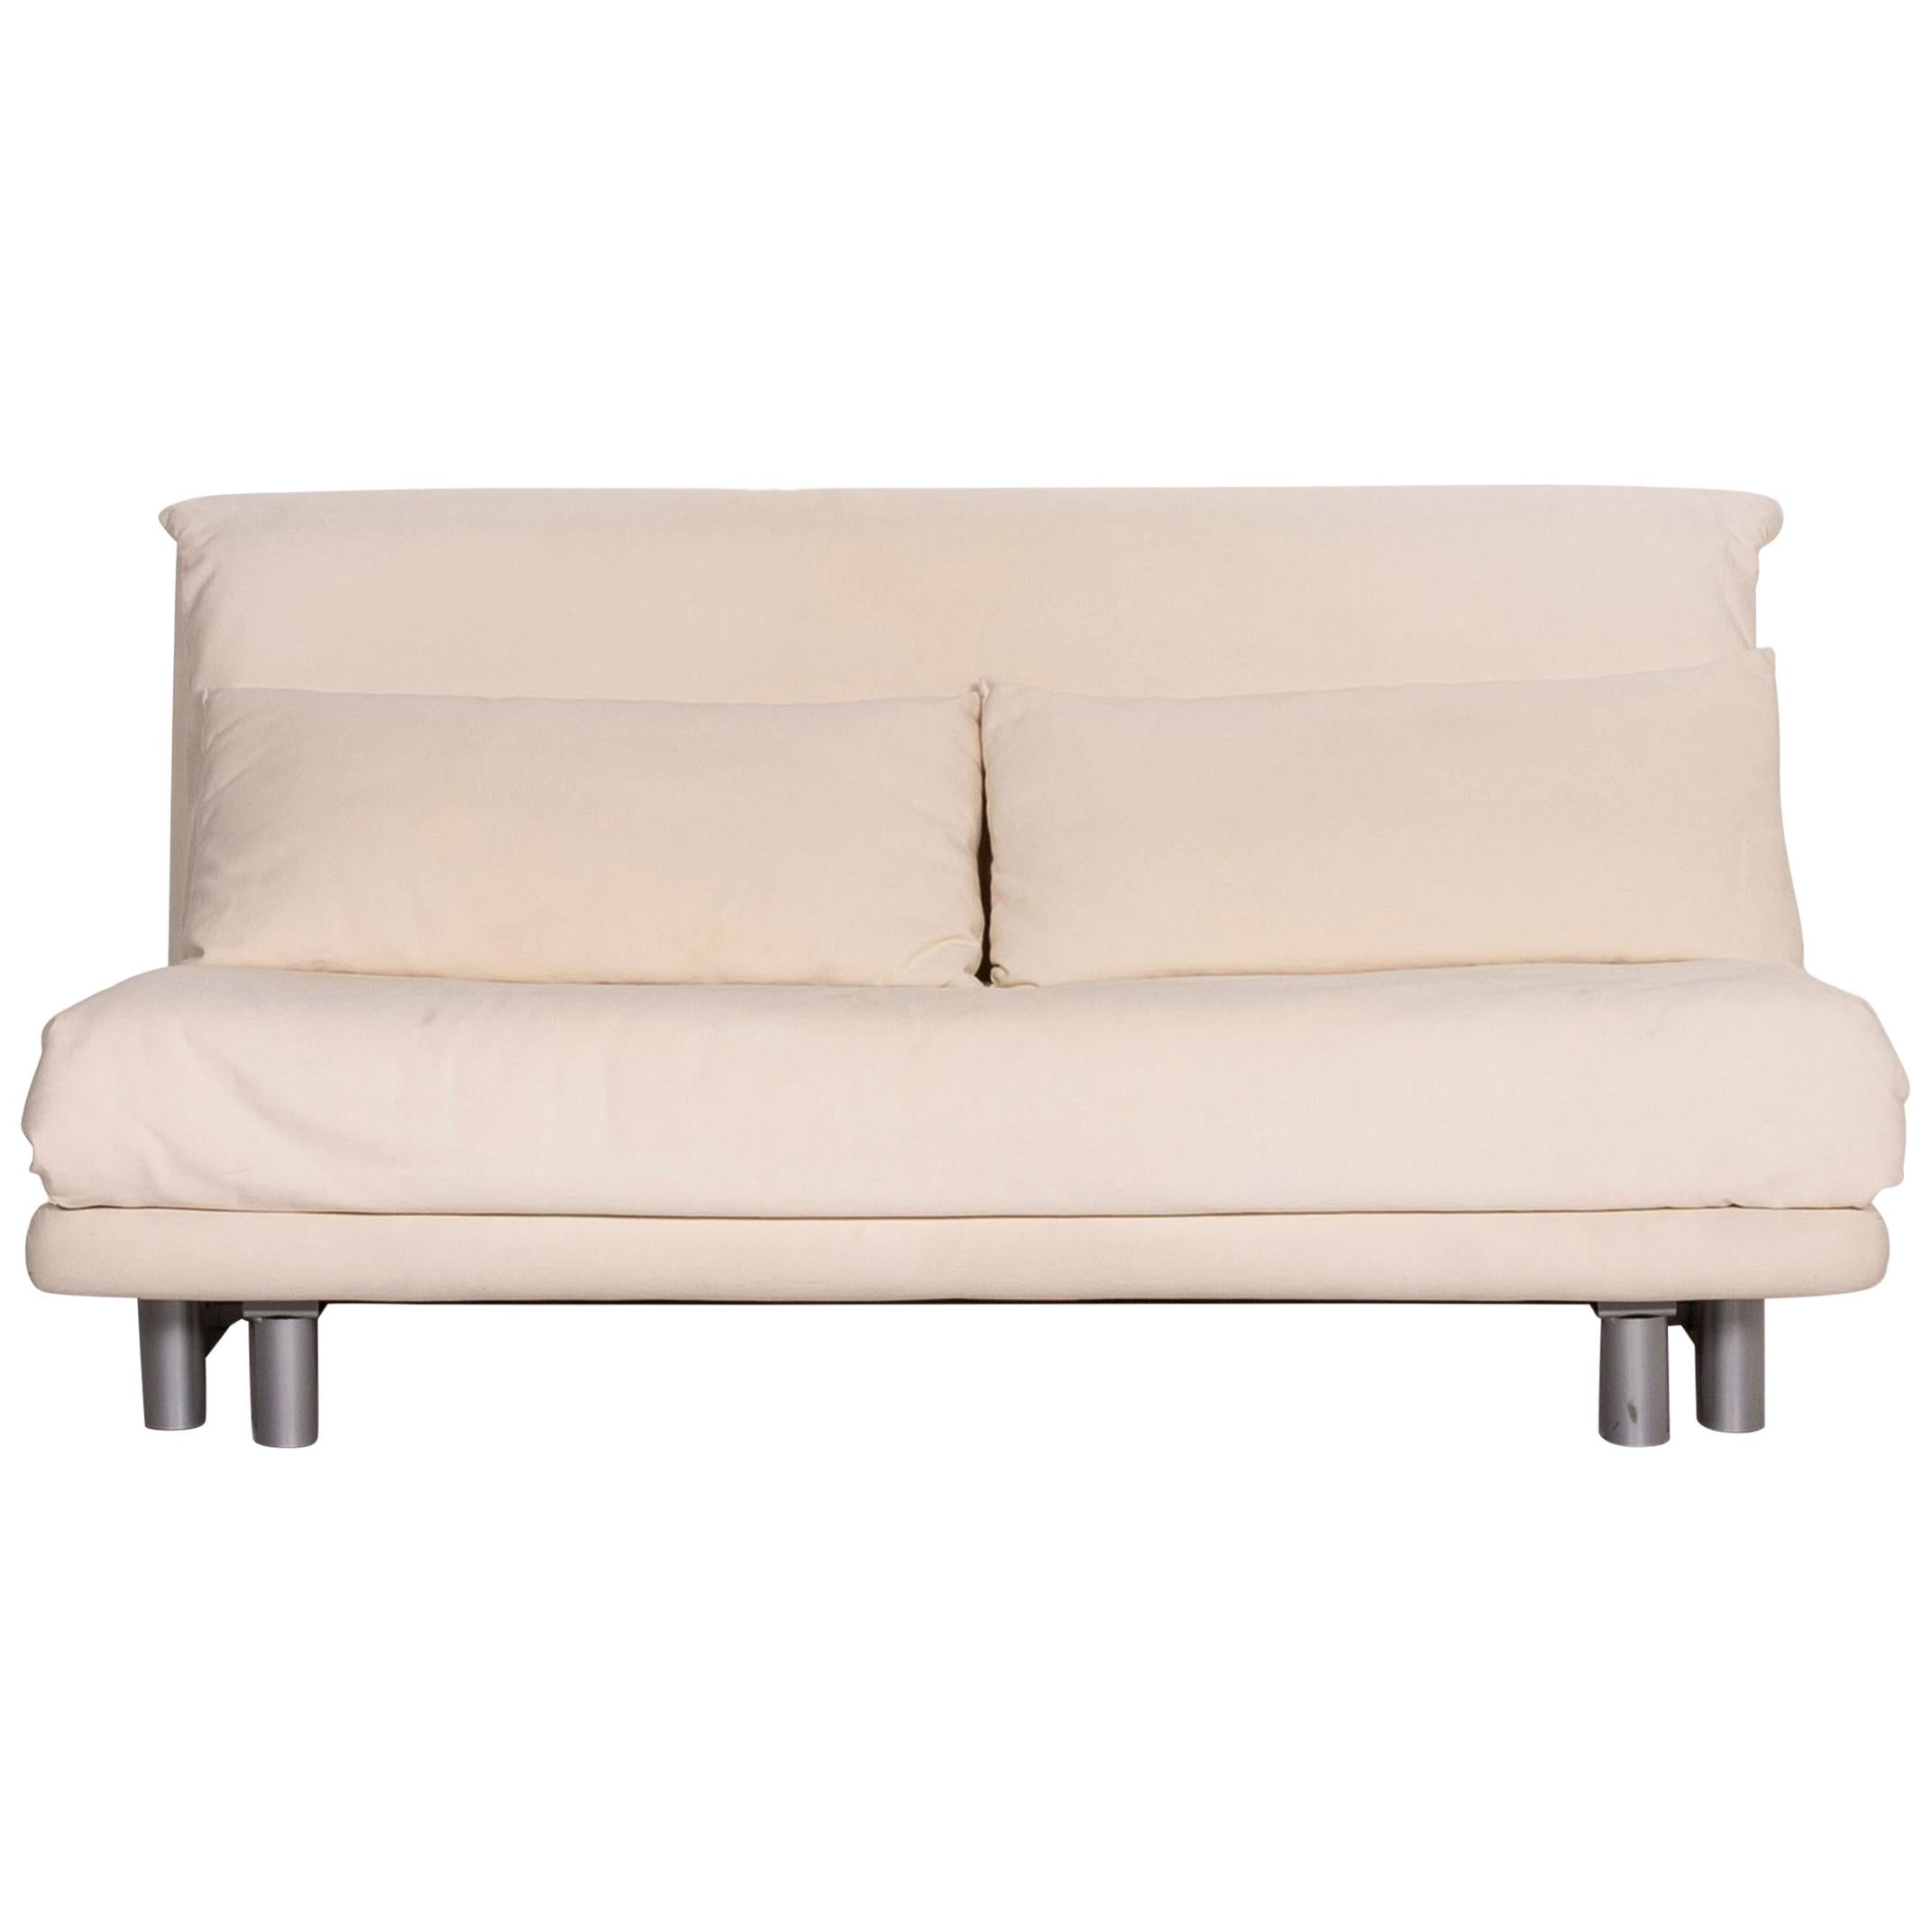 Ligne Roset Fabric Sofa Bed Cream Two-Seat Function Sleeping Function Couch For Sale